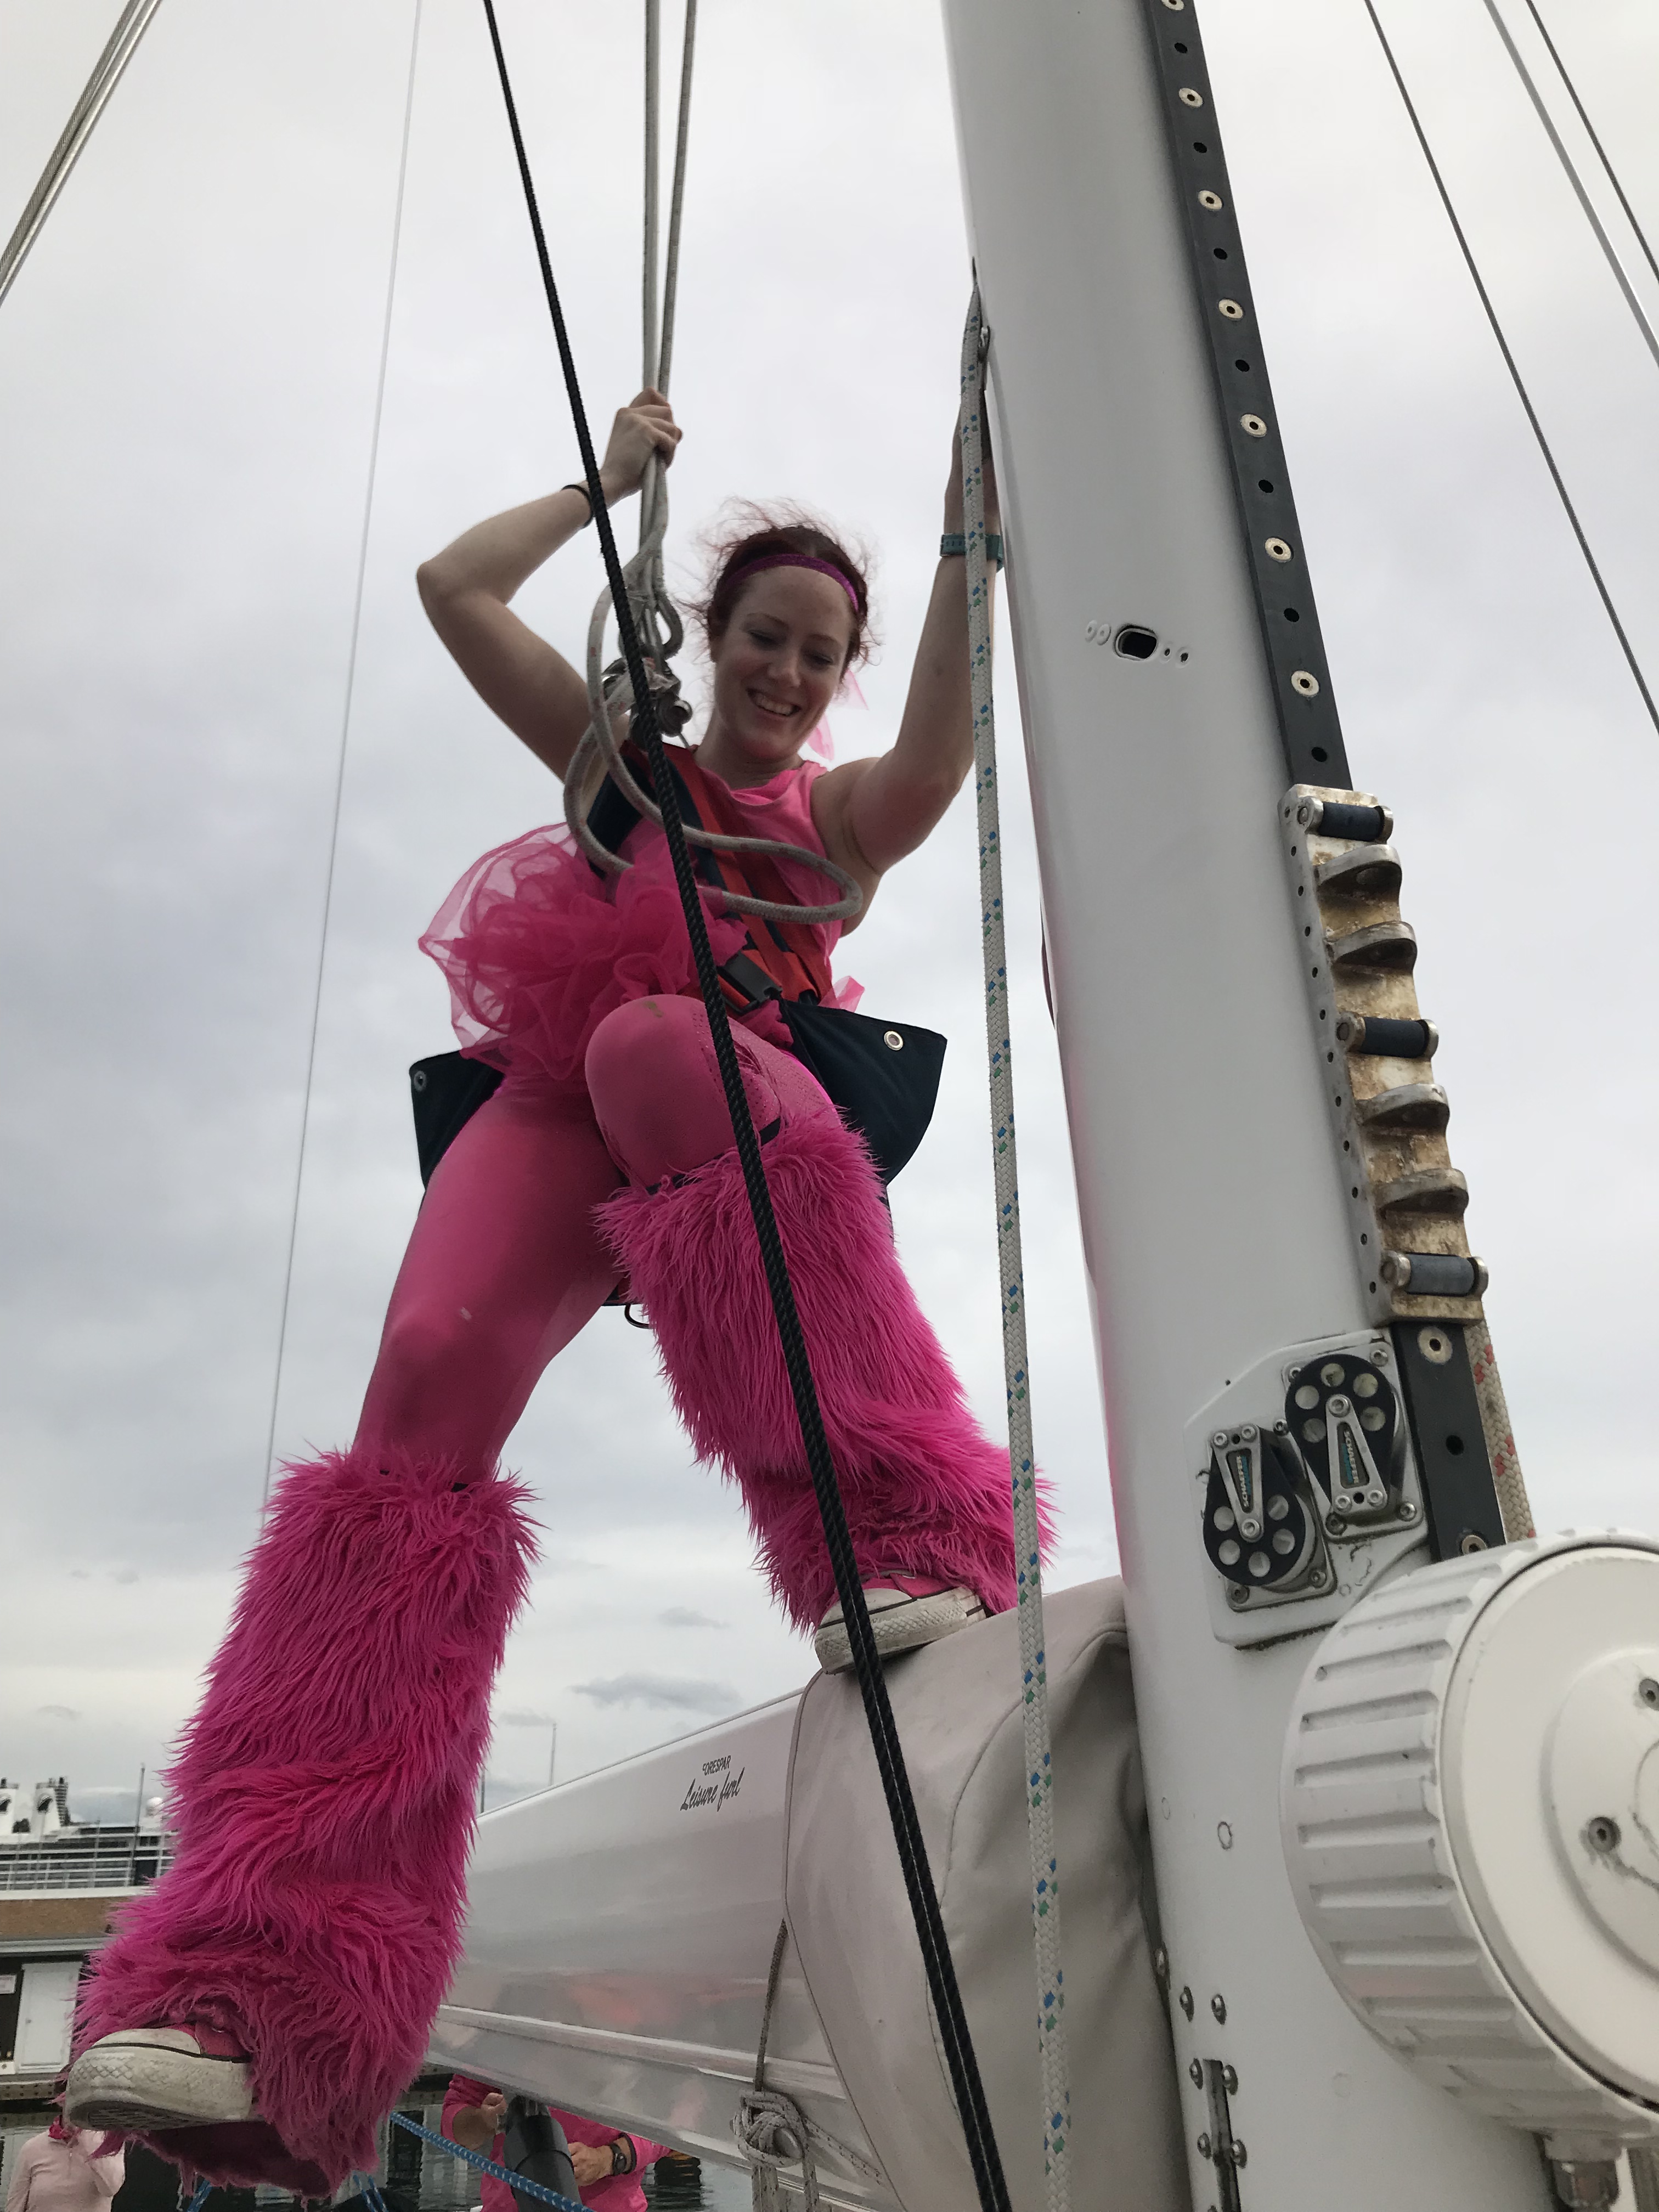 Happy woman in an all pink outfit in mast-climbing gear standing on a boom.